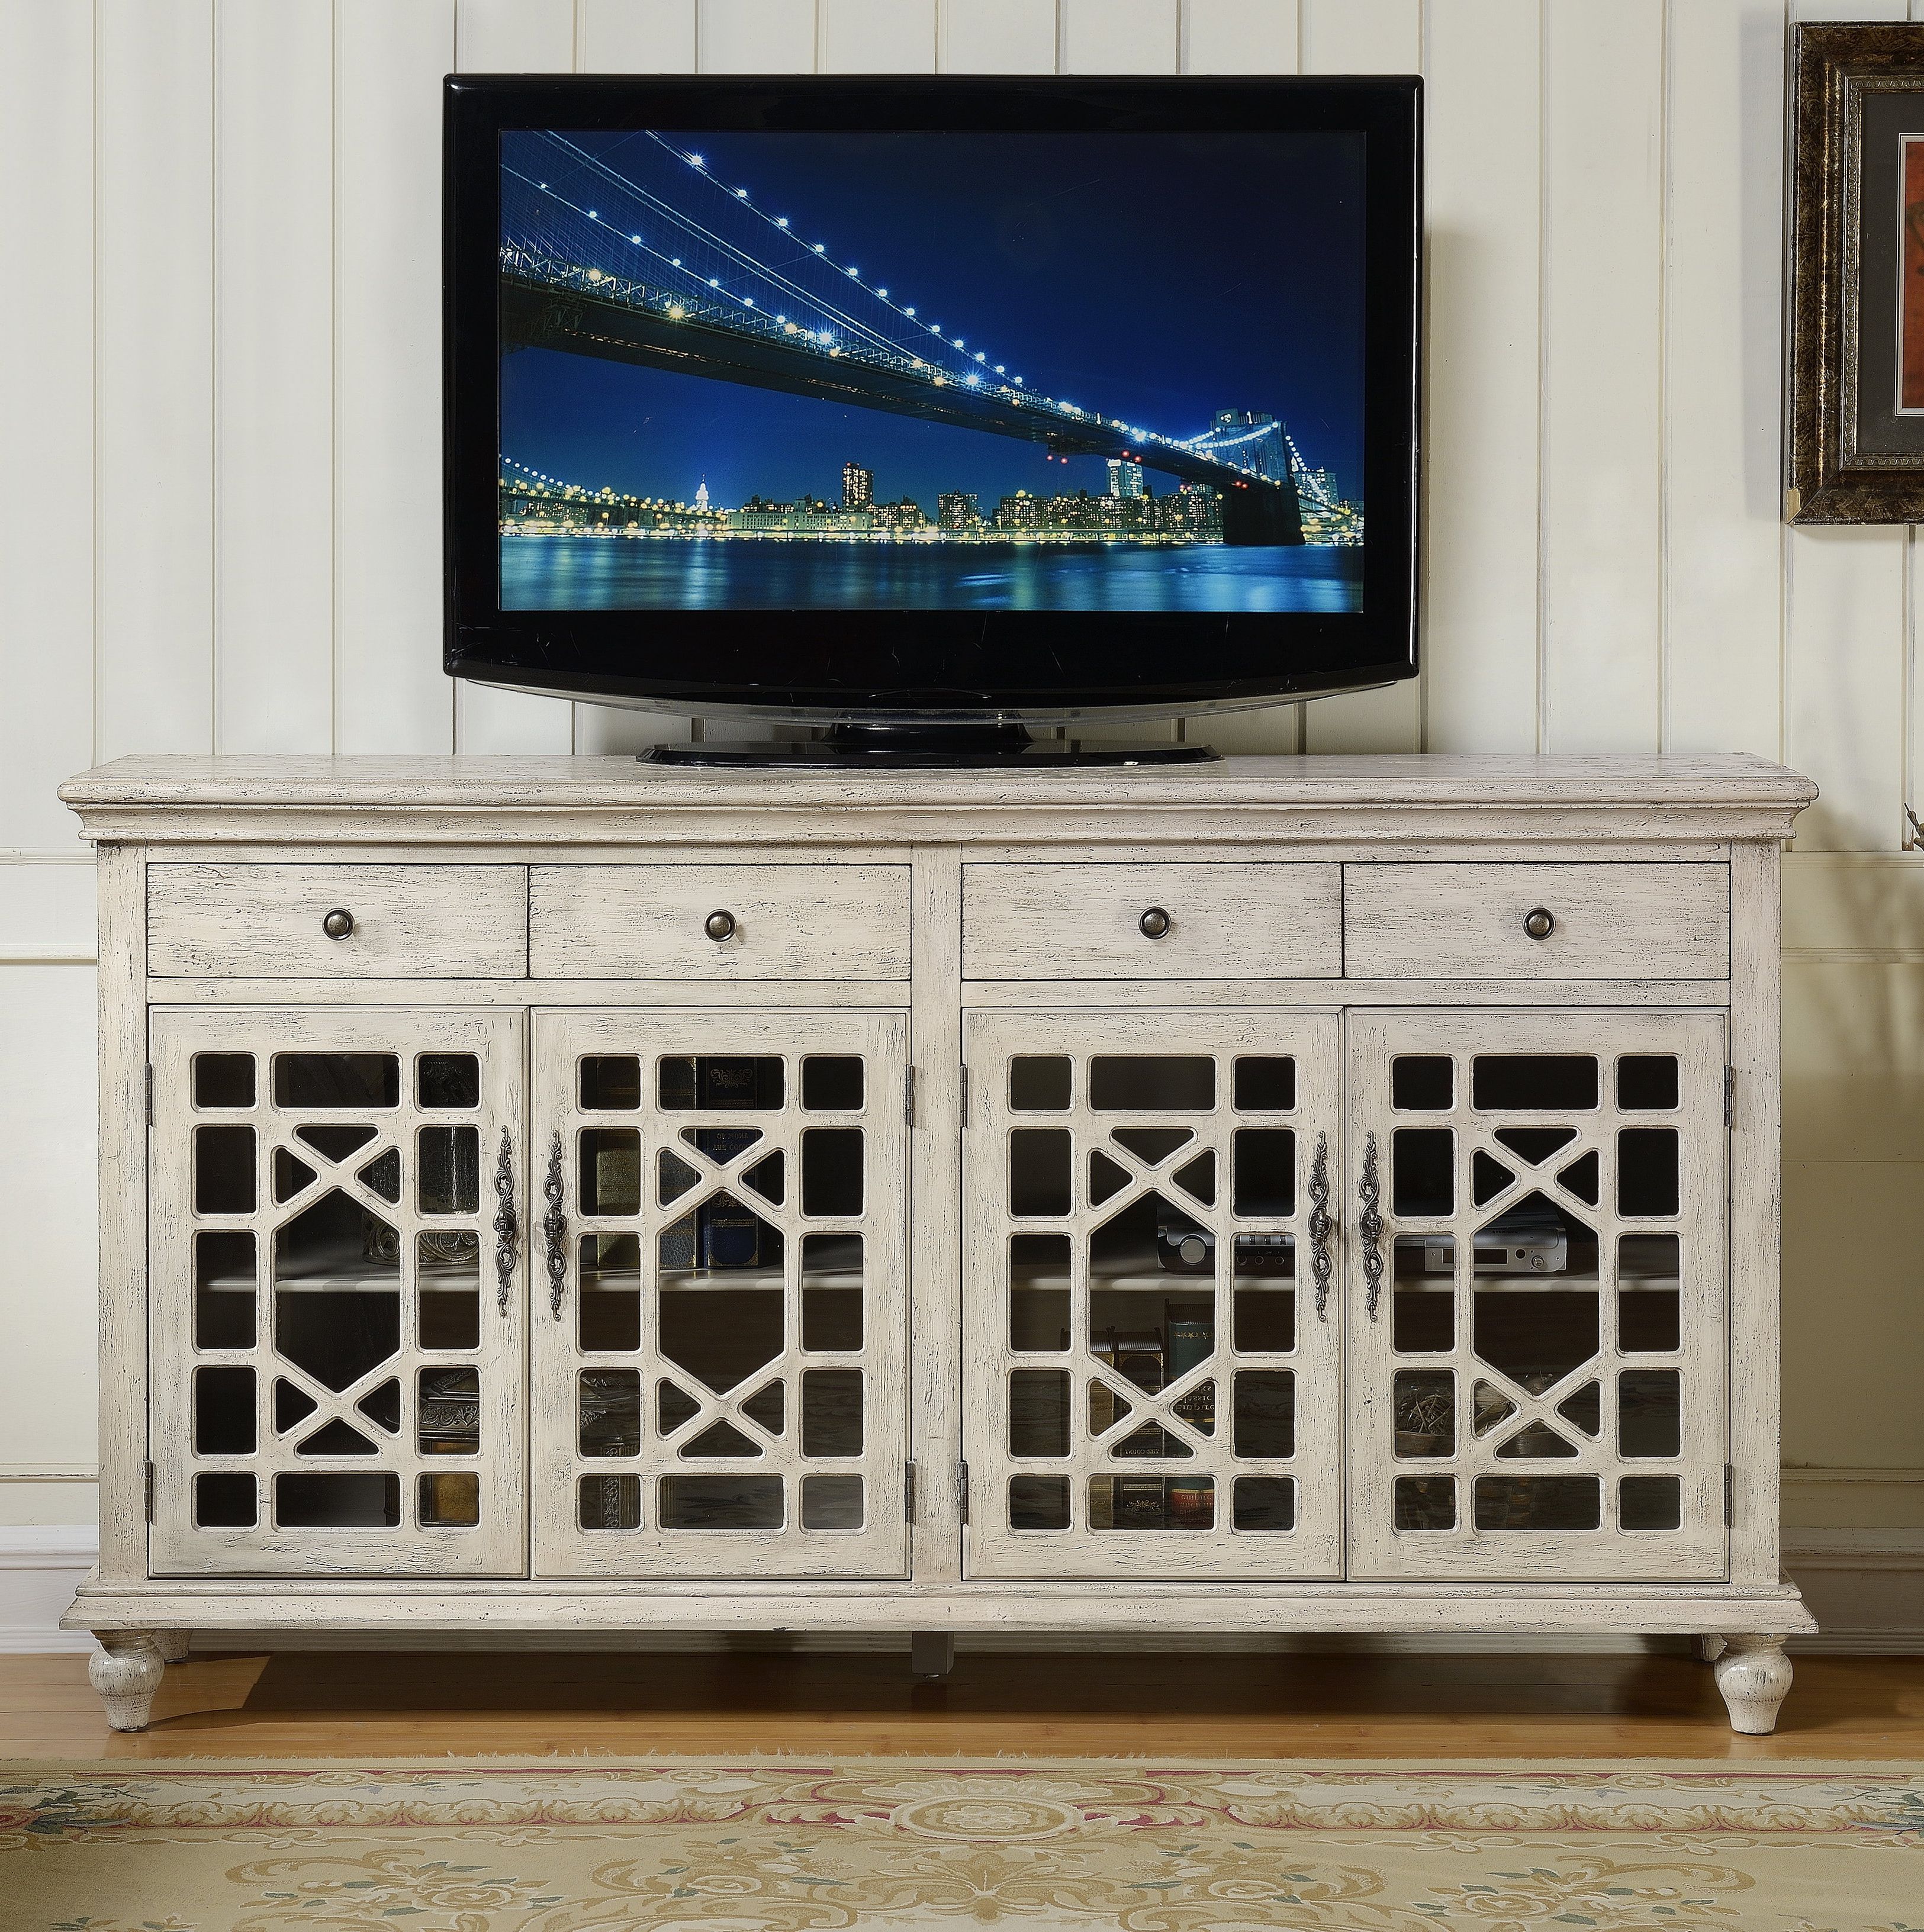 Wayfair Within Widely Used Vintage Style Tv Cabinets (View 14 of 20)